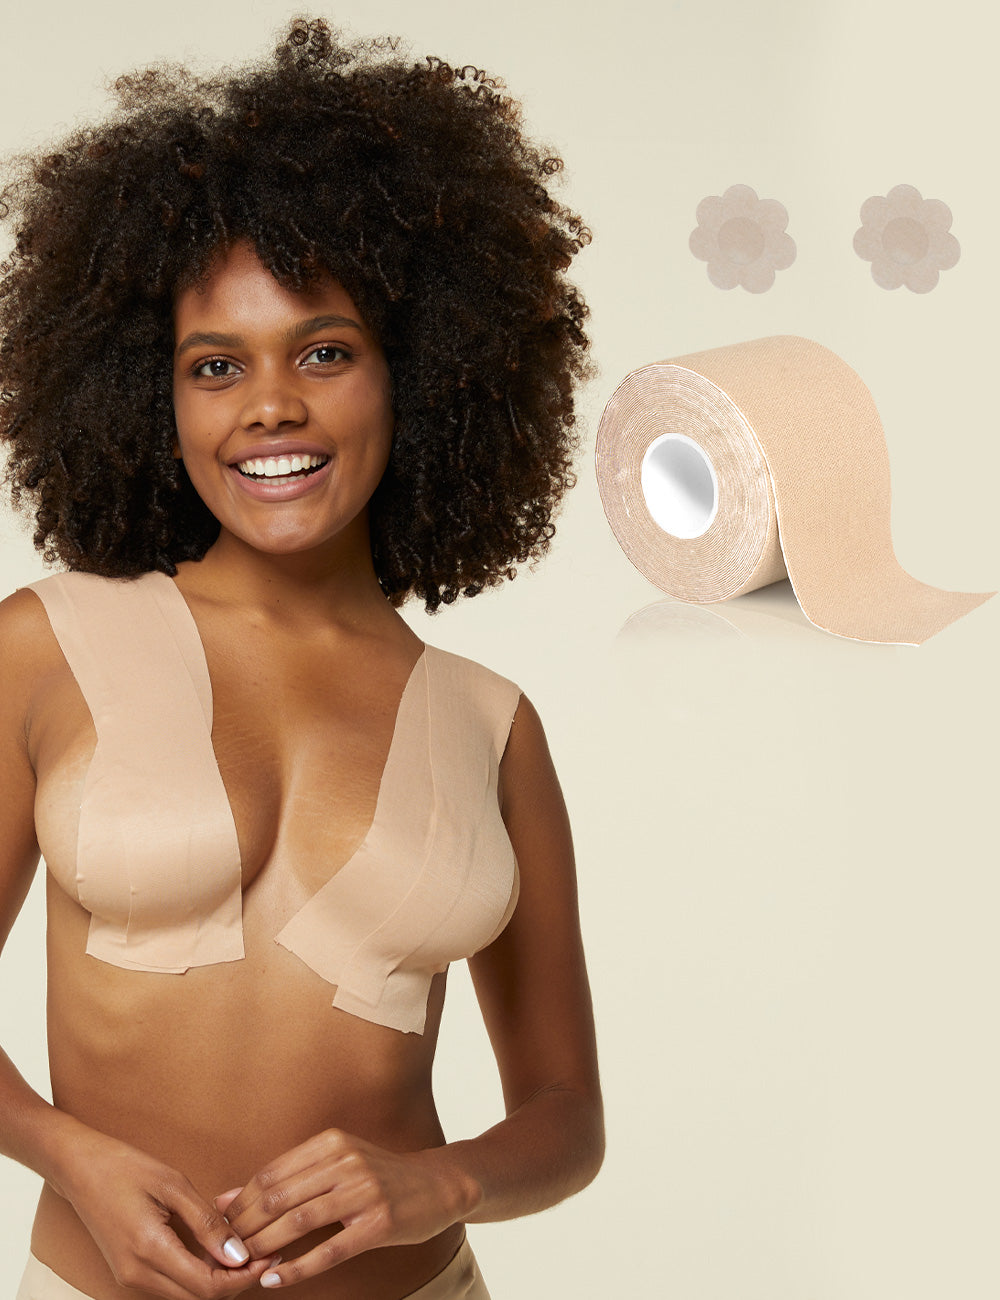 Boob Push Up Tape Boob Tape for Bra Tape for Daily Use(color